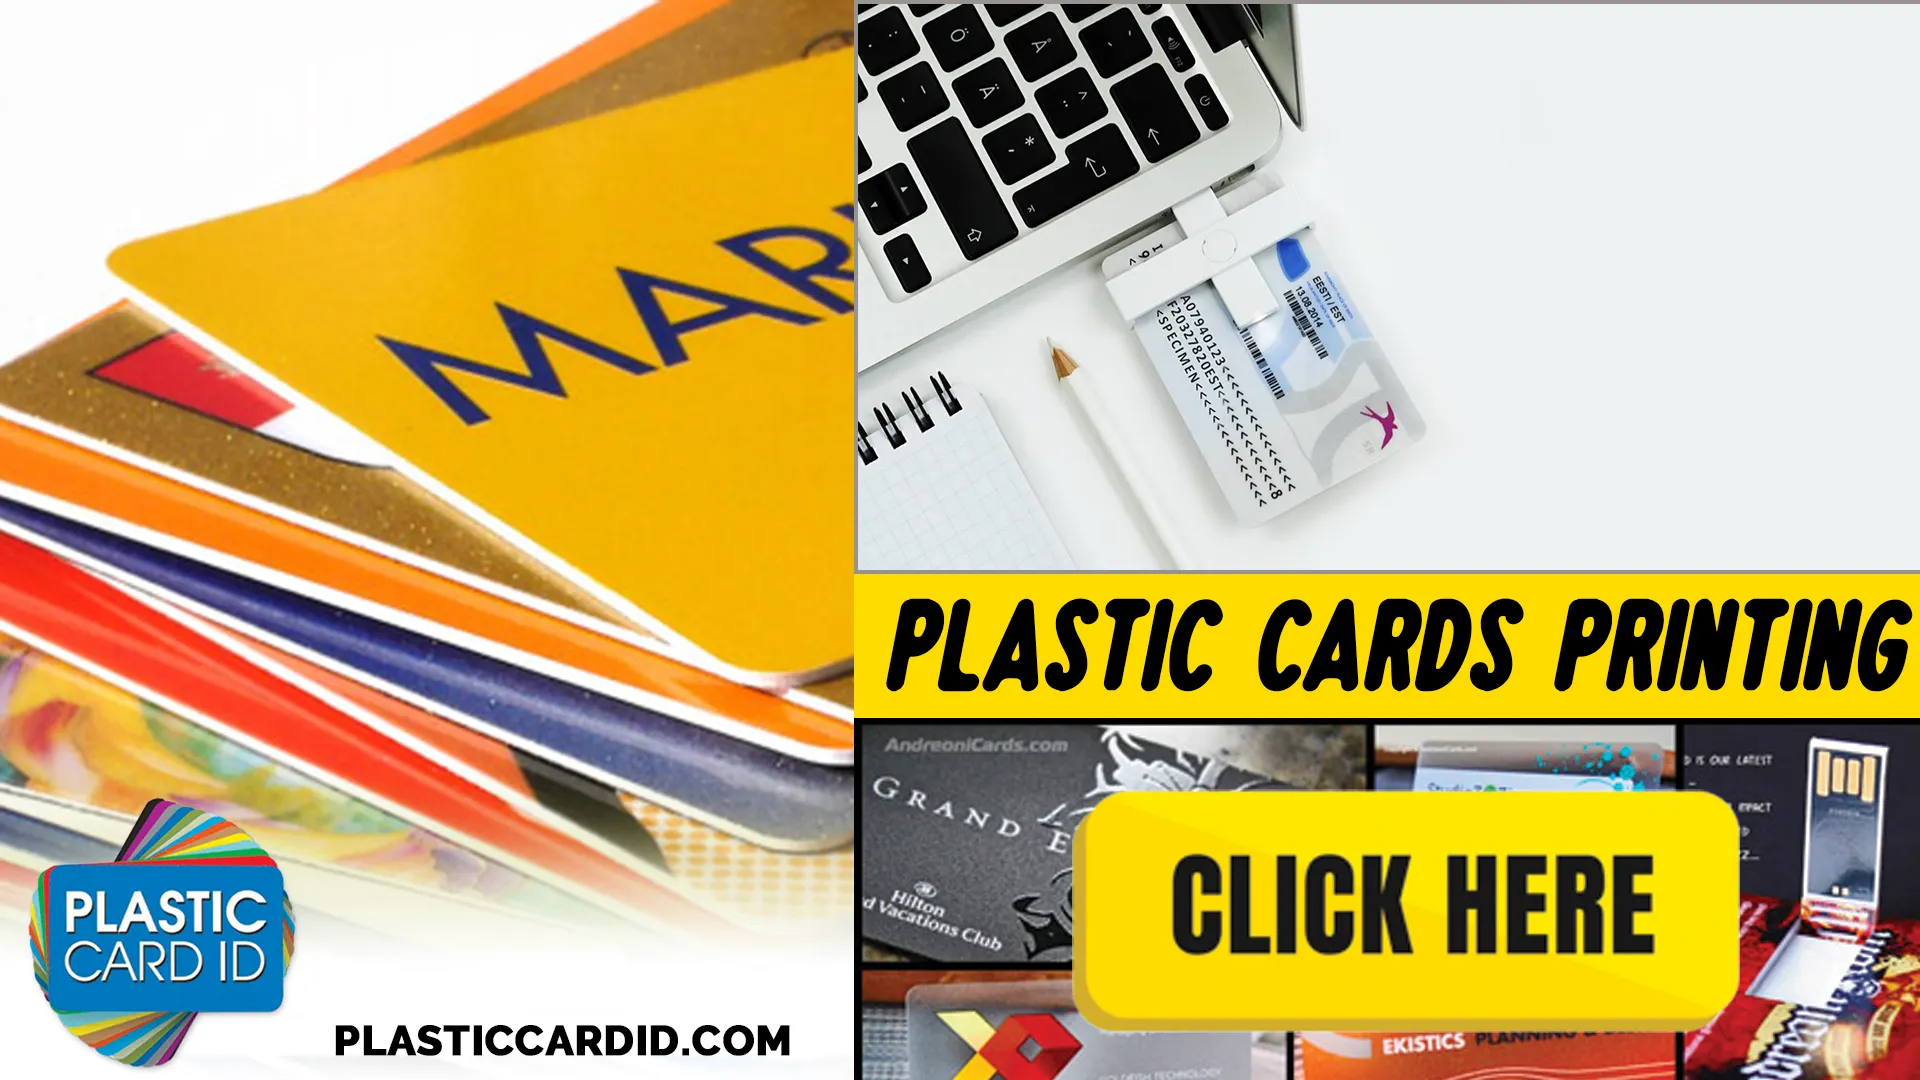 Plastic Card ID
's Unshakeable Commitment to Quality